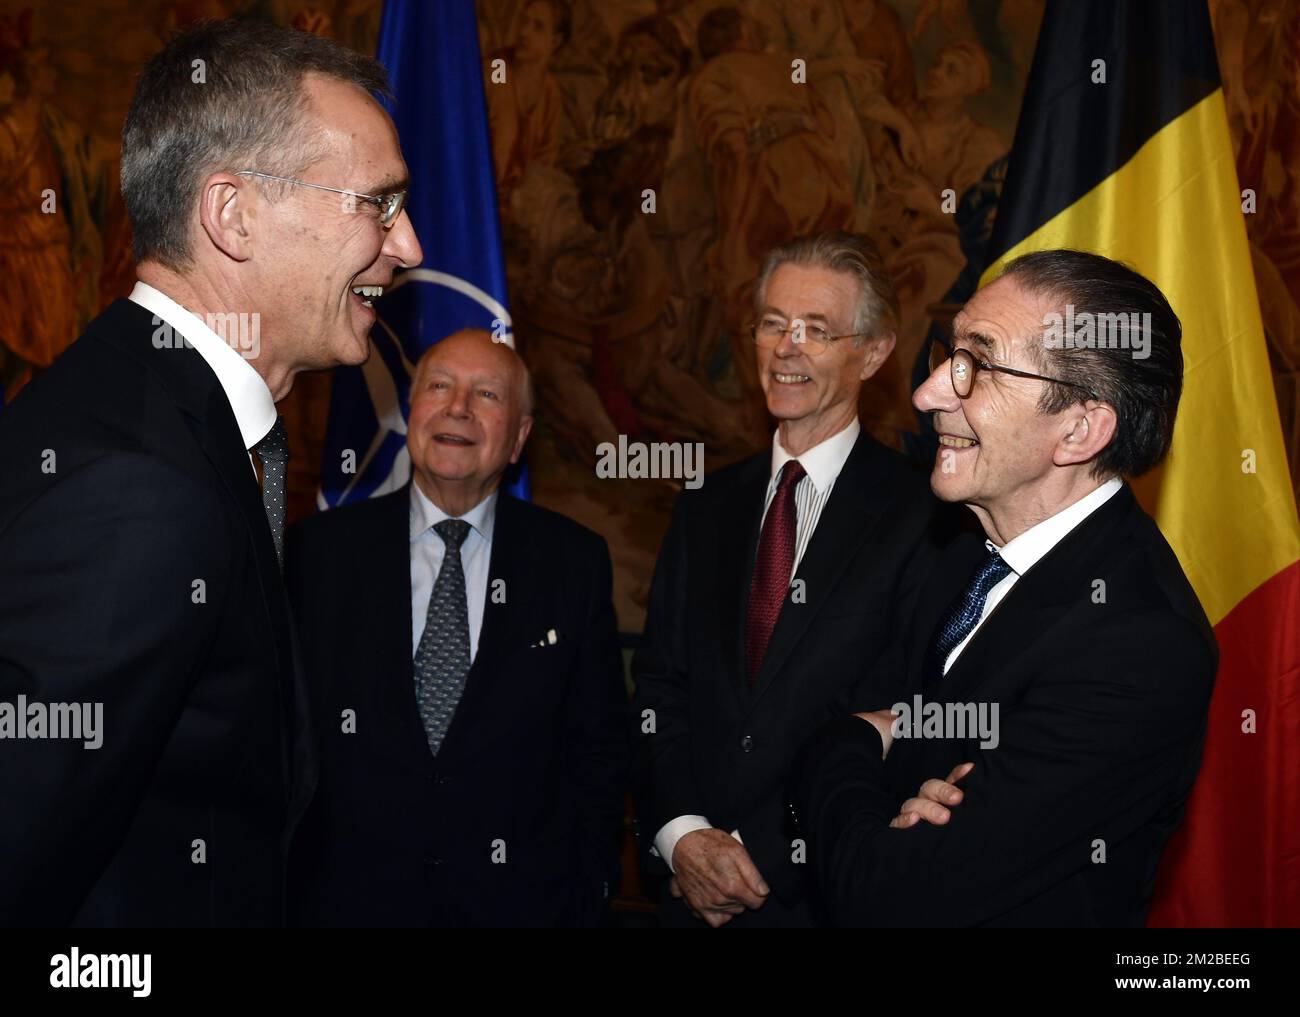 NATO Secretary General Jens Stoltenberg (L), Mark Eyskens (2L) and Willy Claes (R) pictured during a celebration on the 50th anniversary of the 'Harmel Doctrine', Tuesday 05 December 2017 in Brussels. The late Belgian Minister of Foreign Affairs Pierre Harmel wrote the 'Future Tasks of the Alliance', envisioning a greater role for the NATO in ensuring worldwide peace and stability. BELGA PHOTO ERIC LALMAND Stock Photo